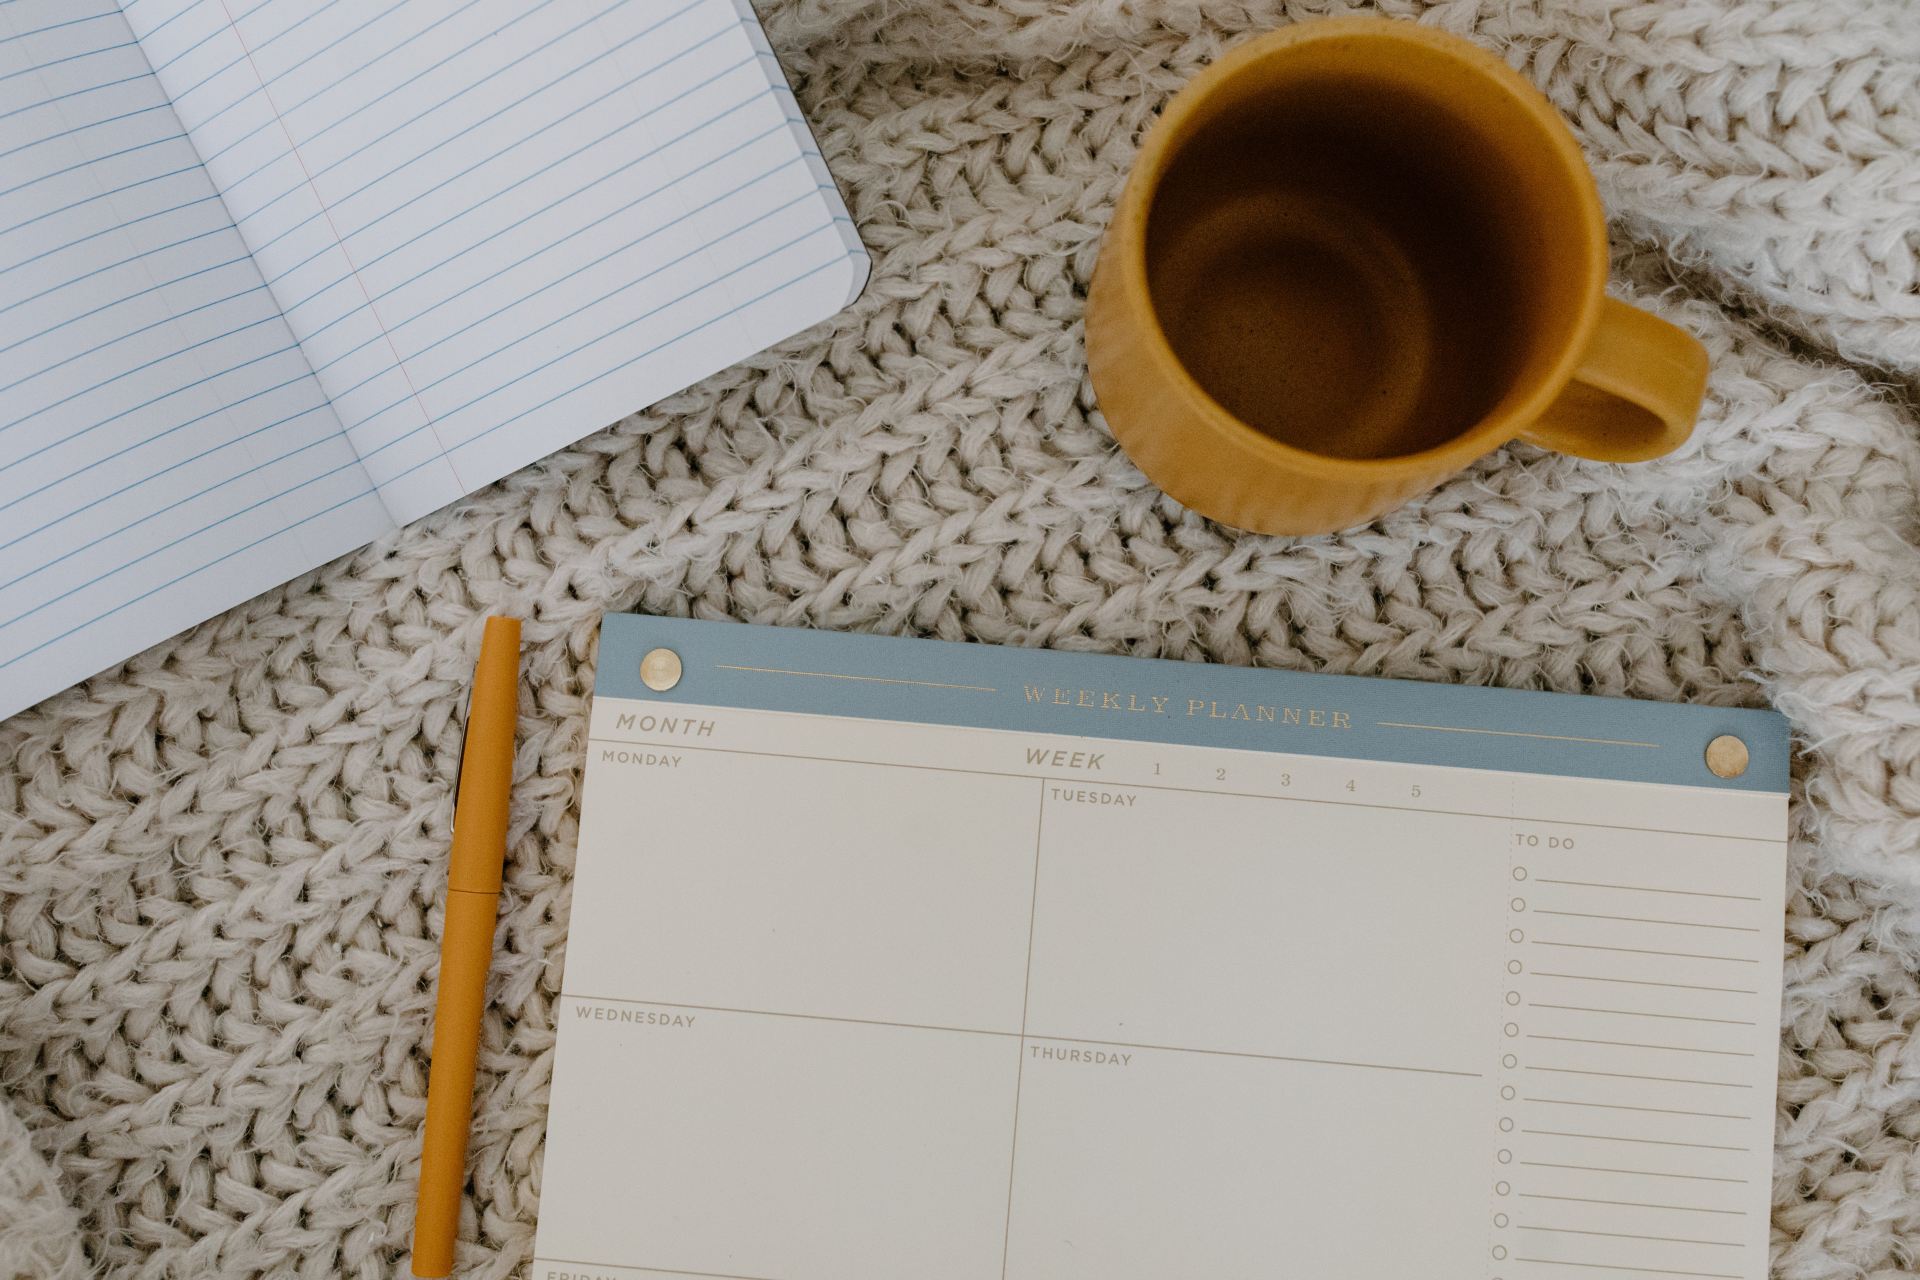 A close up a coffee cup and a weekly planner